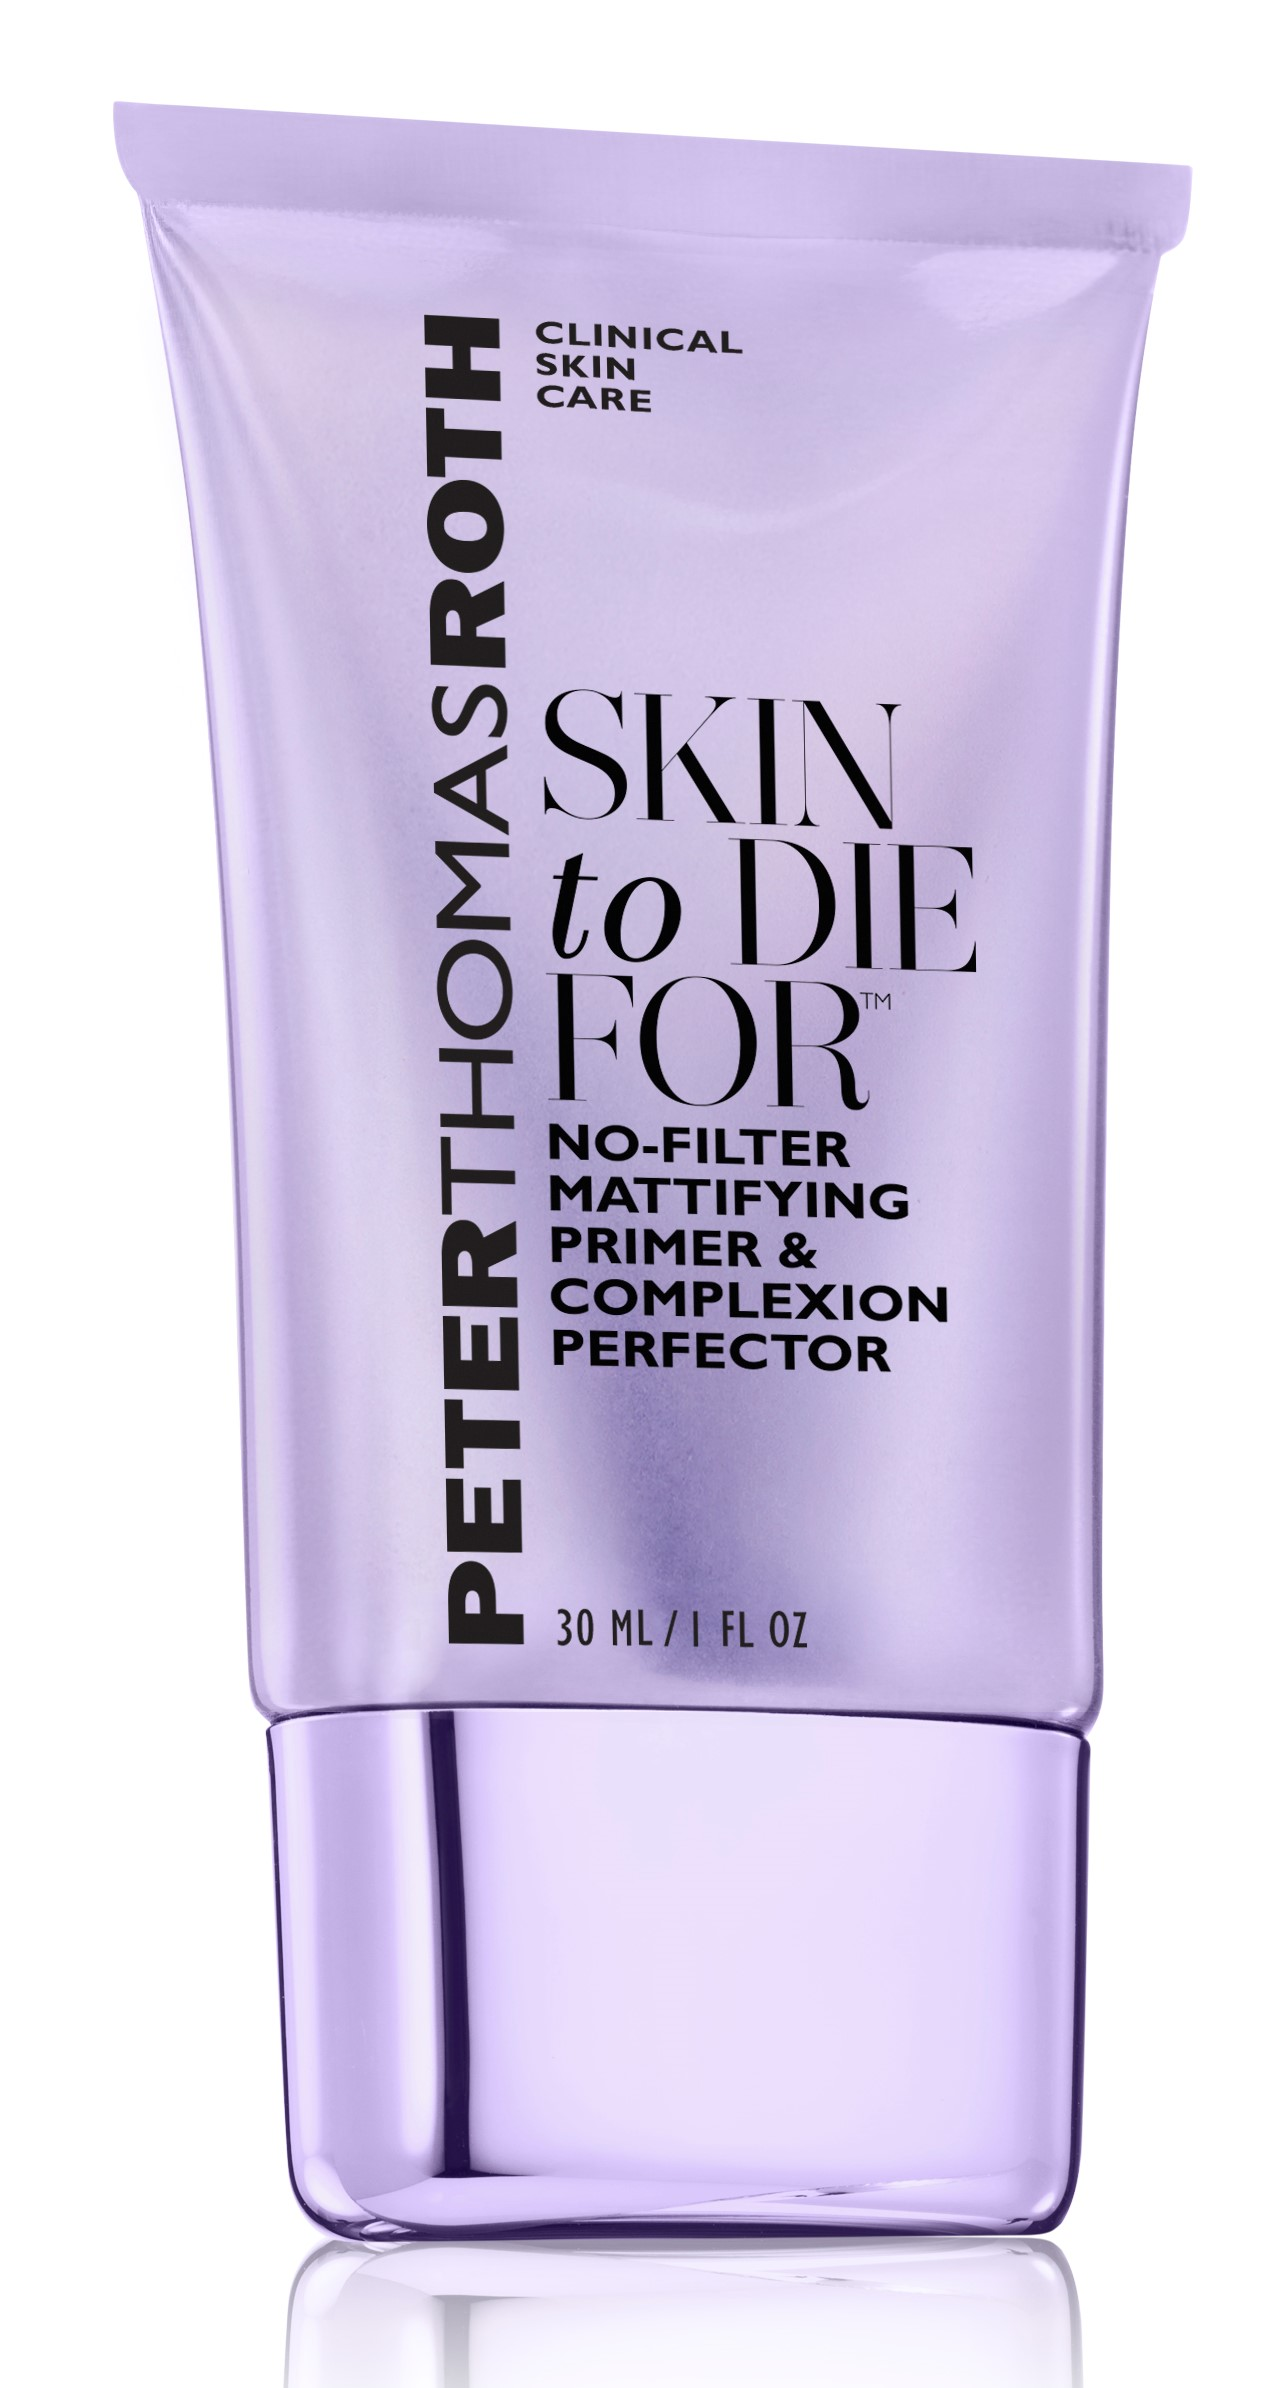 Peter Thomas Roth Skin To Die For Mattifying Primer & Complexion Perfector 30 ml.